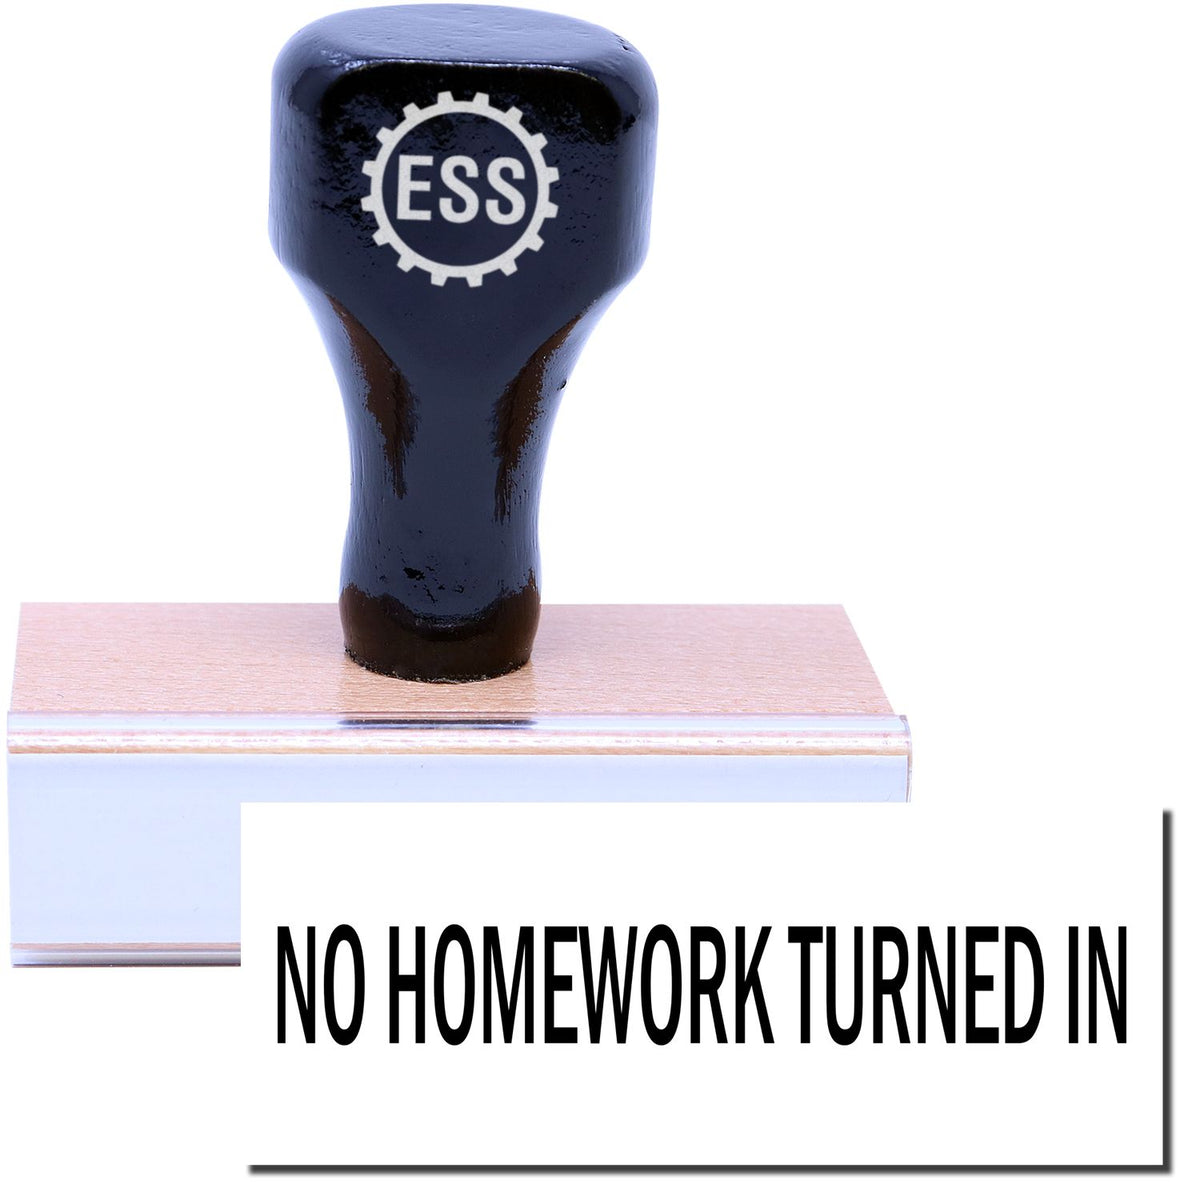 A stock office rubber stamp with a stamped image showing how the text &quot;NO HOMEWORK TURNED IN&quot; is displayed after stamping.